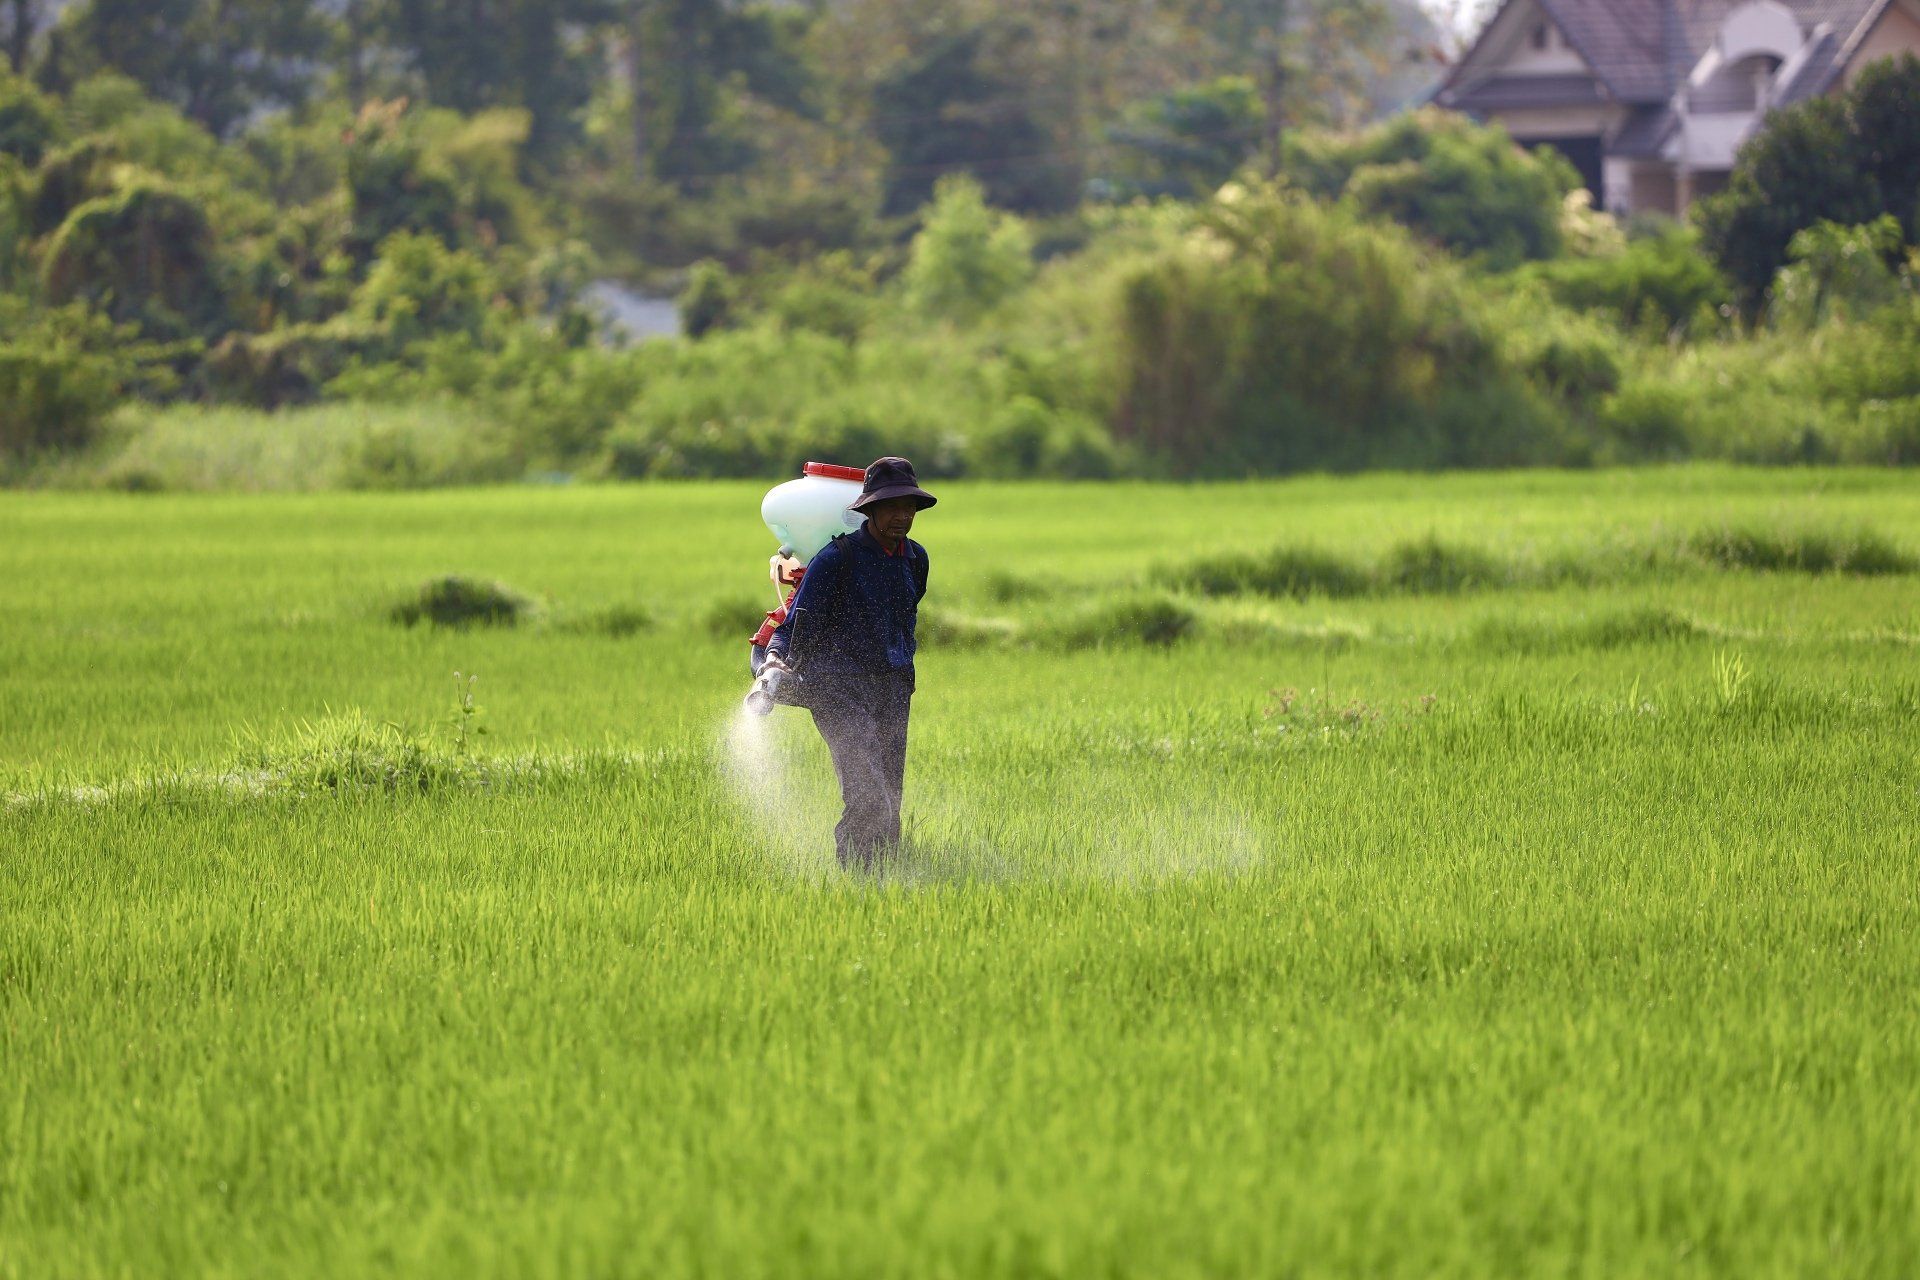 A person outside in a large open field with a large container on their back, spraying fertilizer